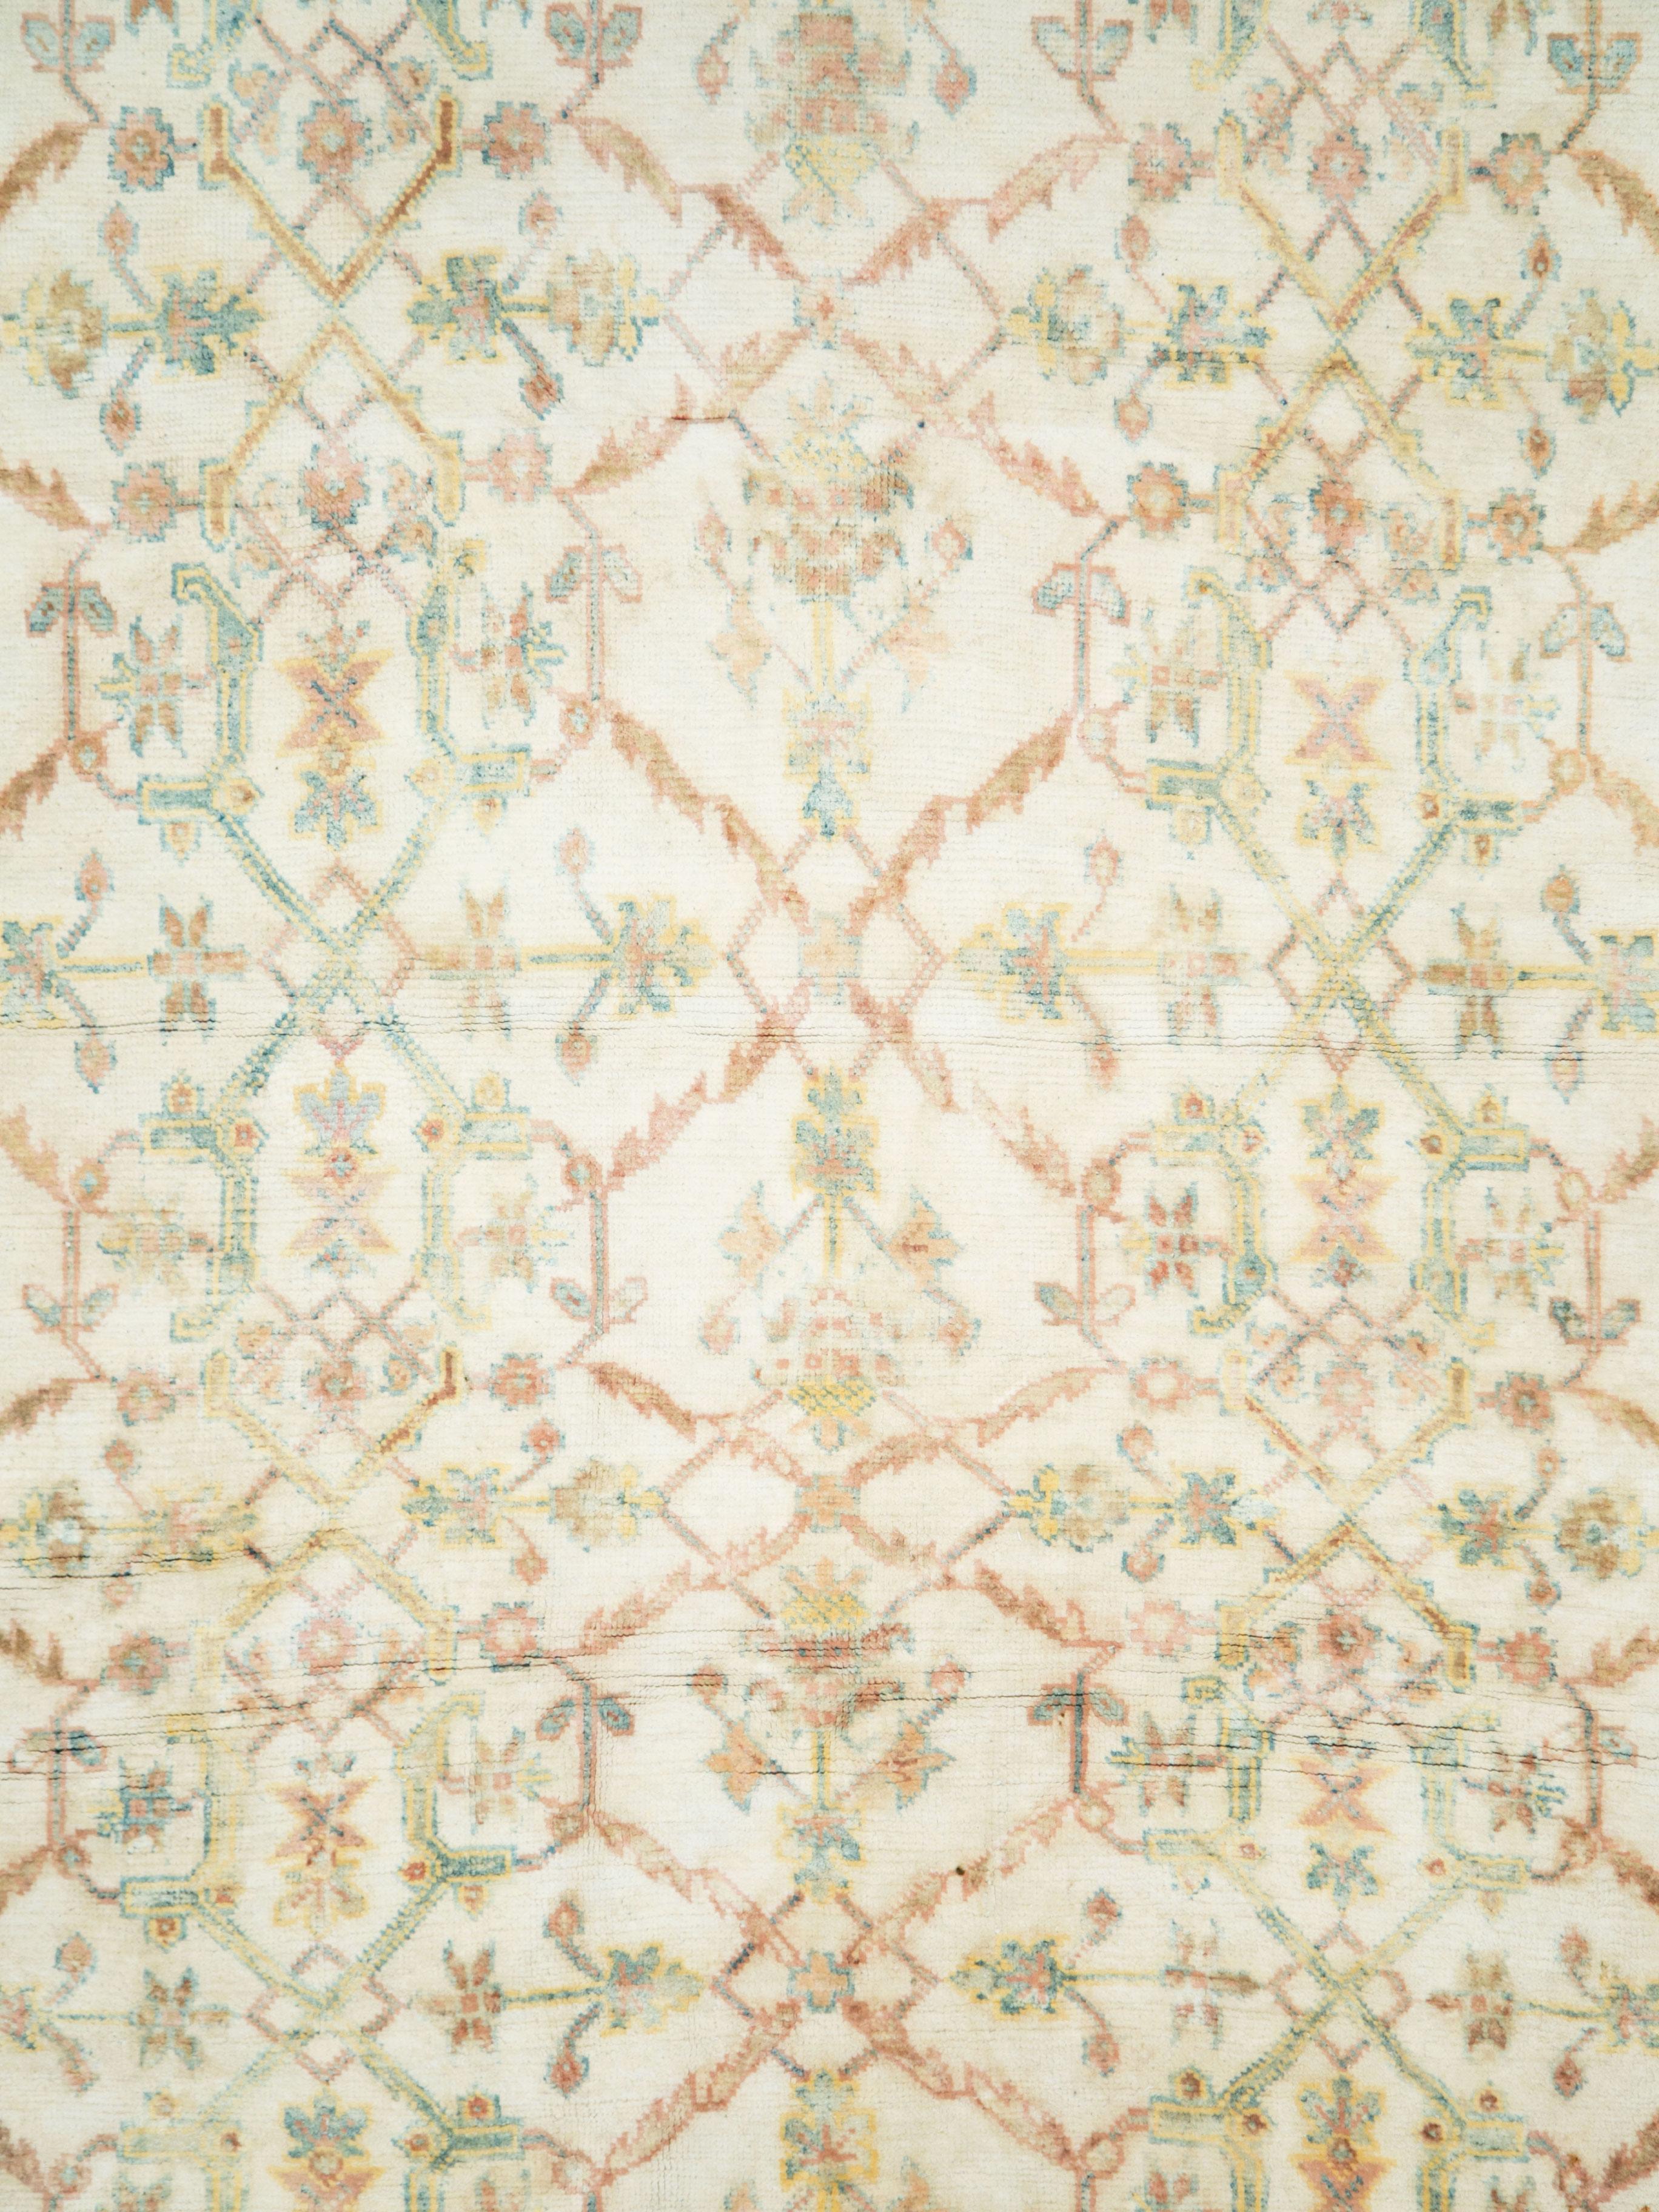 A vintage Indian cotton Agra carpet from the mid-20th century.